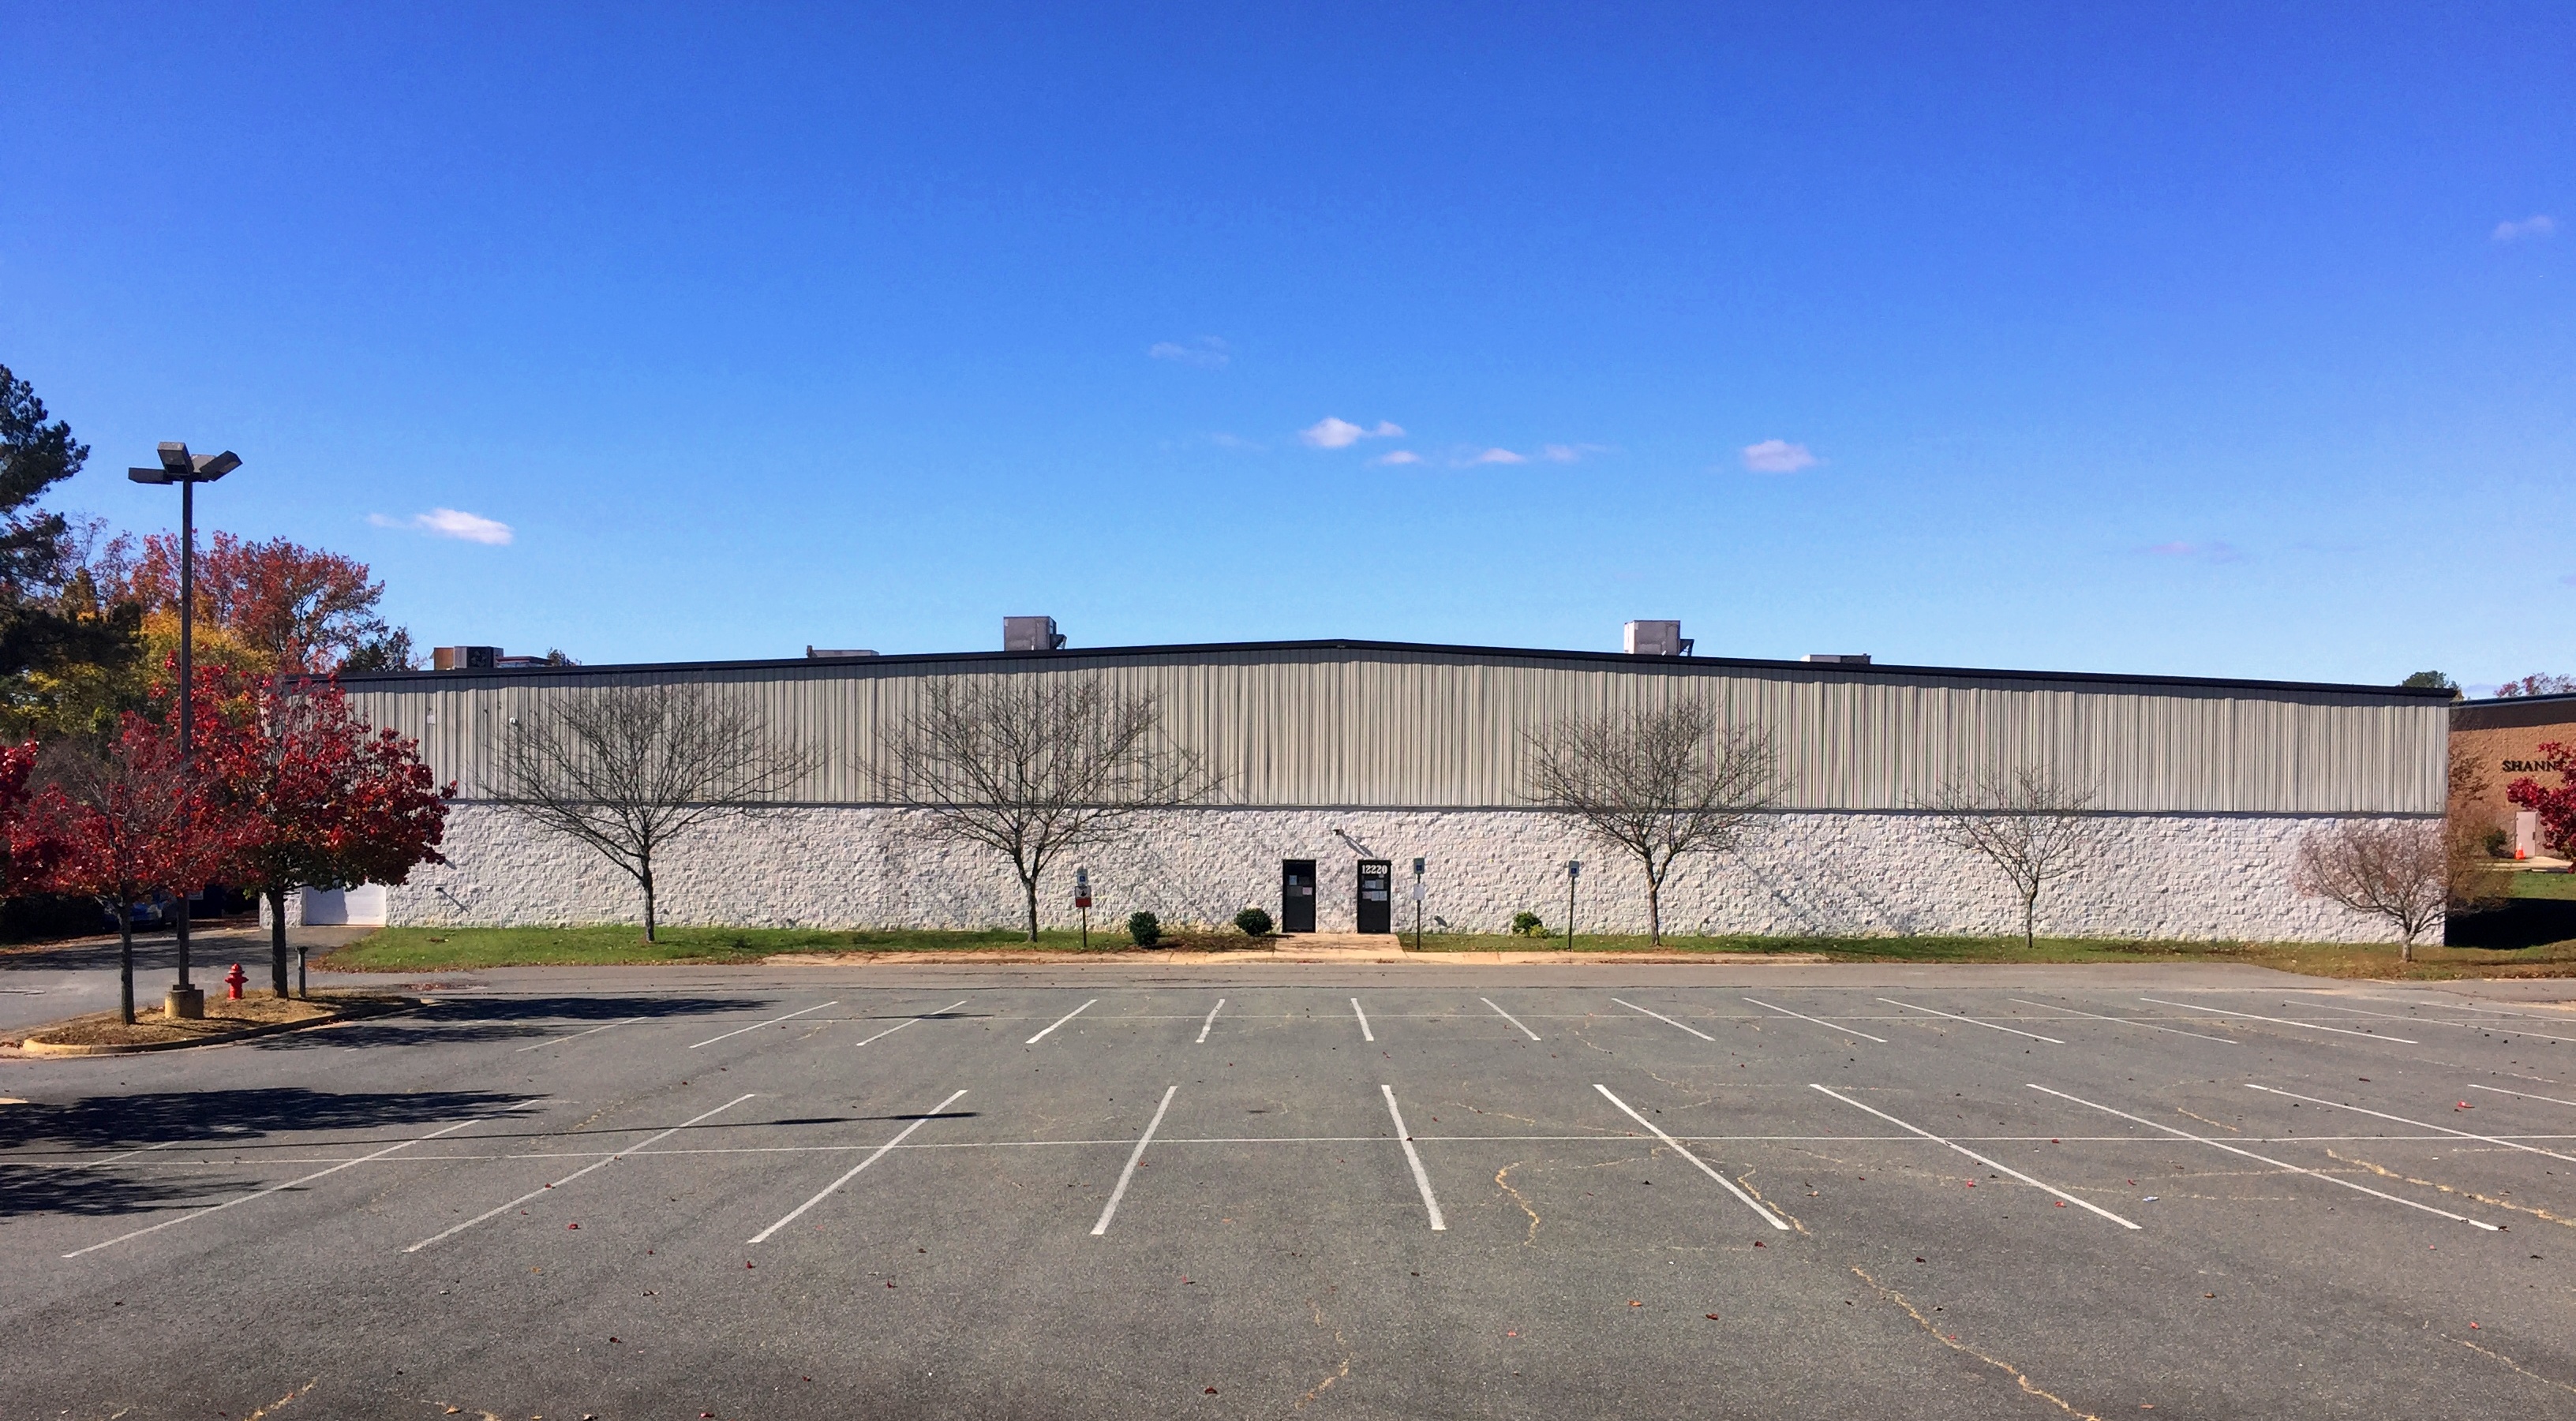 Coldwell Banker Commercial Elite Closes Sale of Multi-Use Sporting Facility for $2.425 Million